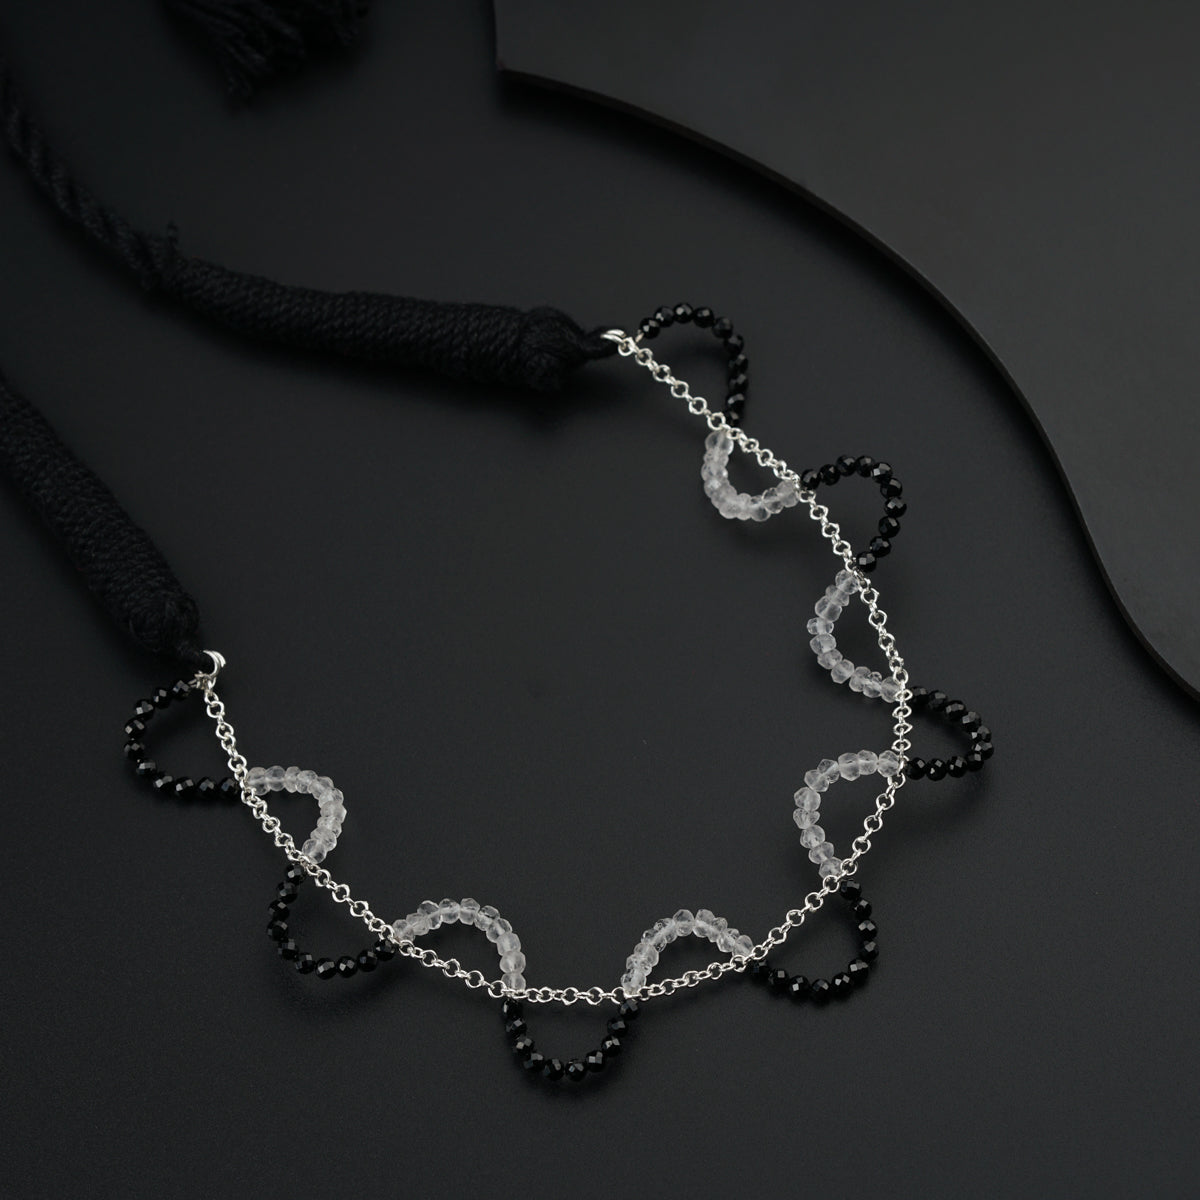 a black and white necklace on a black surface